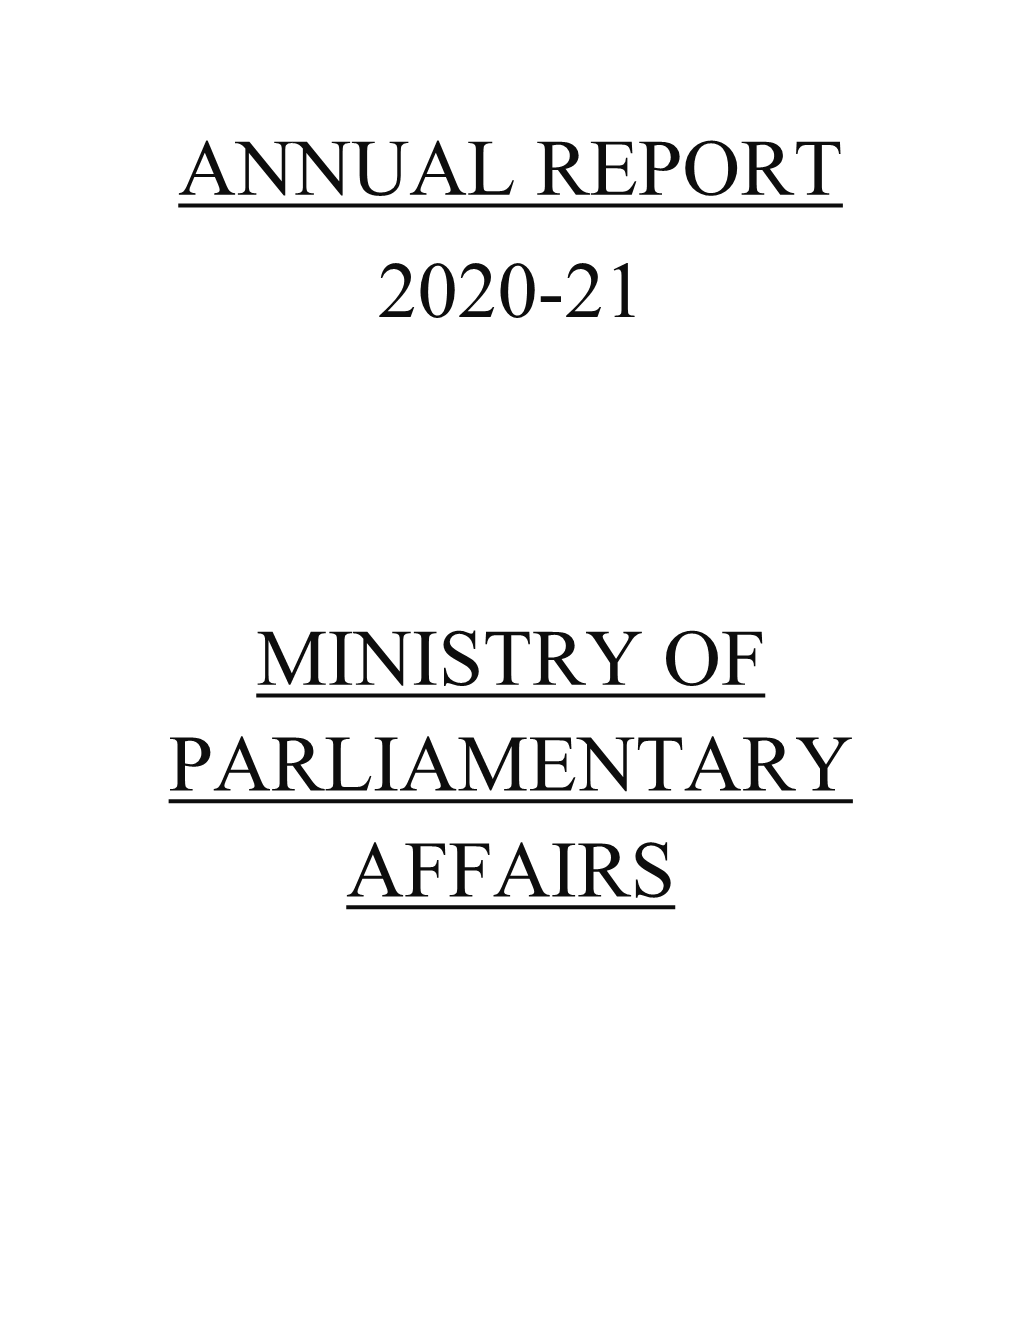 Annual Report 2020-21 Ministry of Parliamentary Affairs